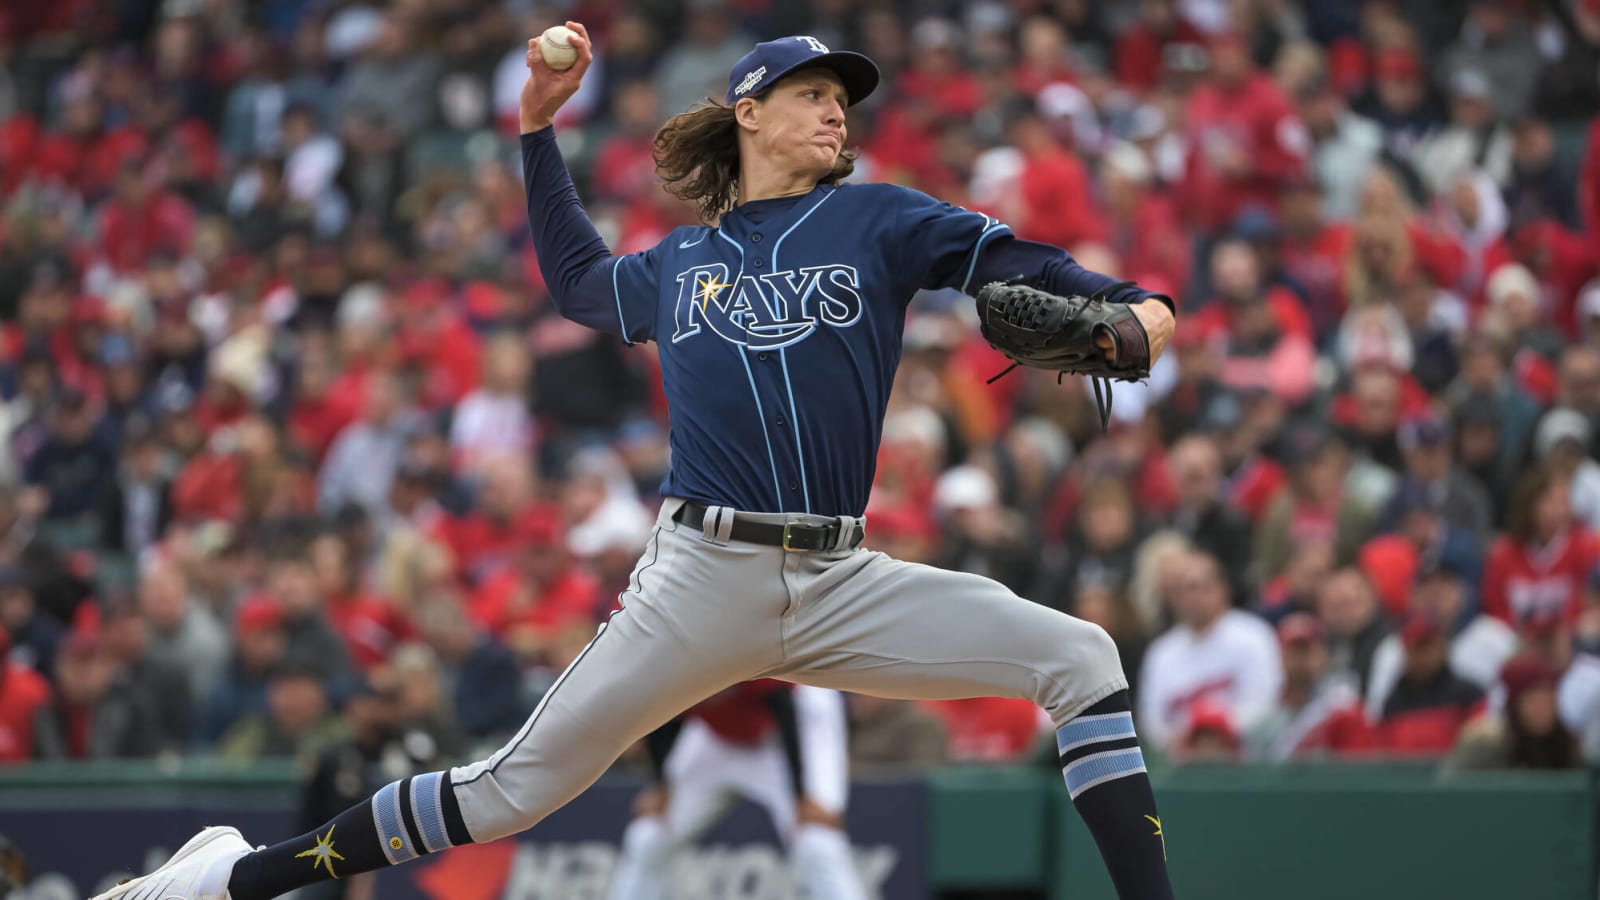 Tampa Bay Rays - A certain Tyler Glasnow made his Summer